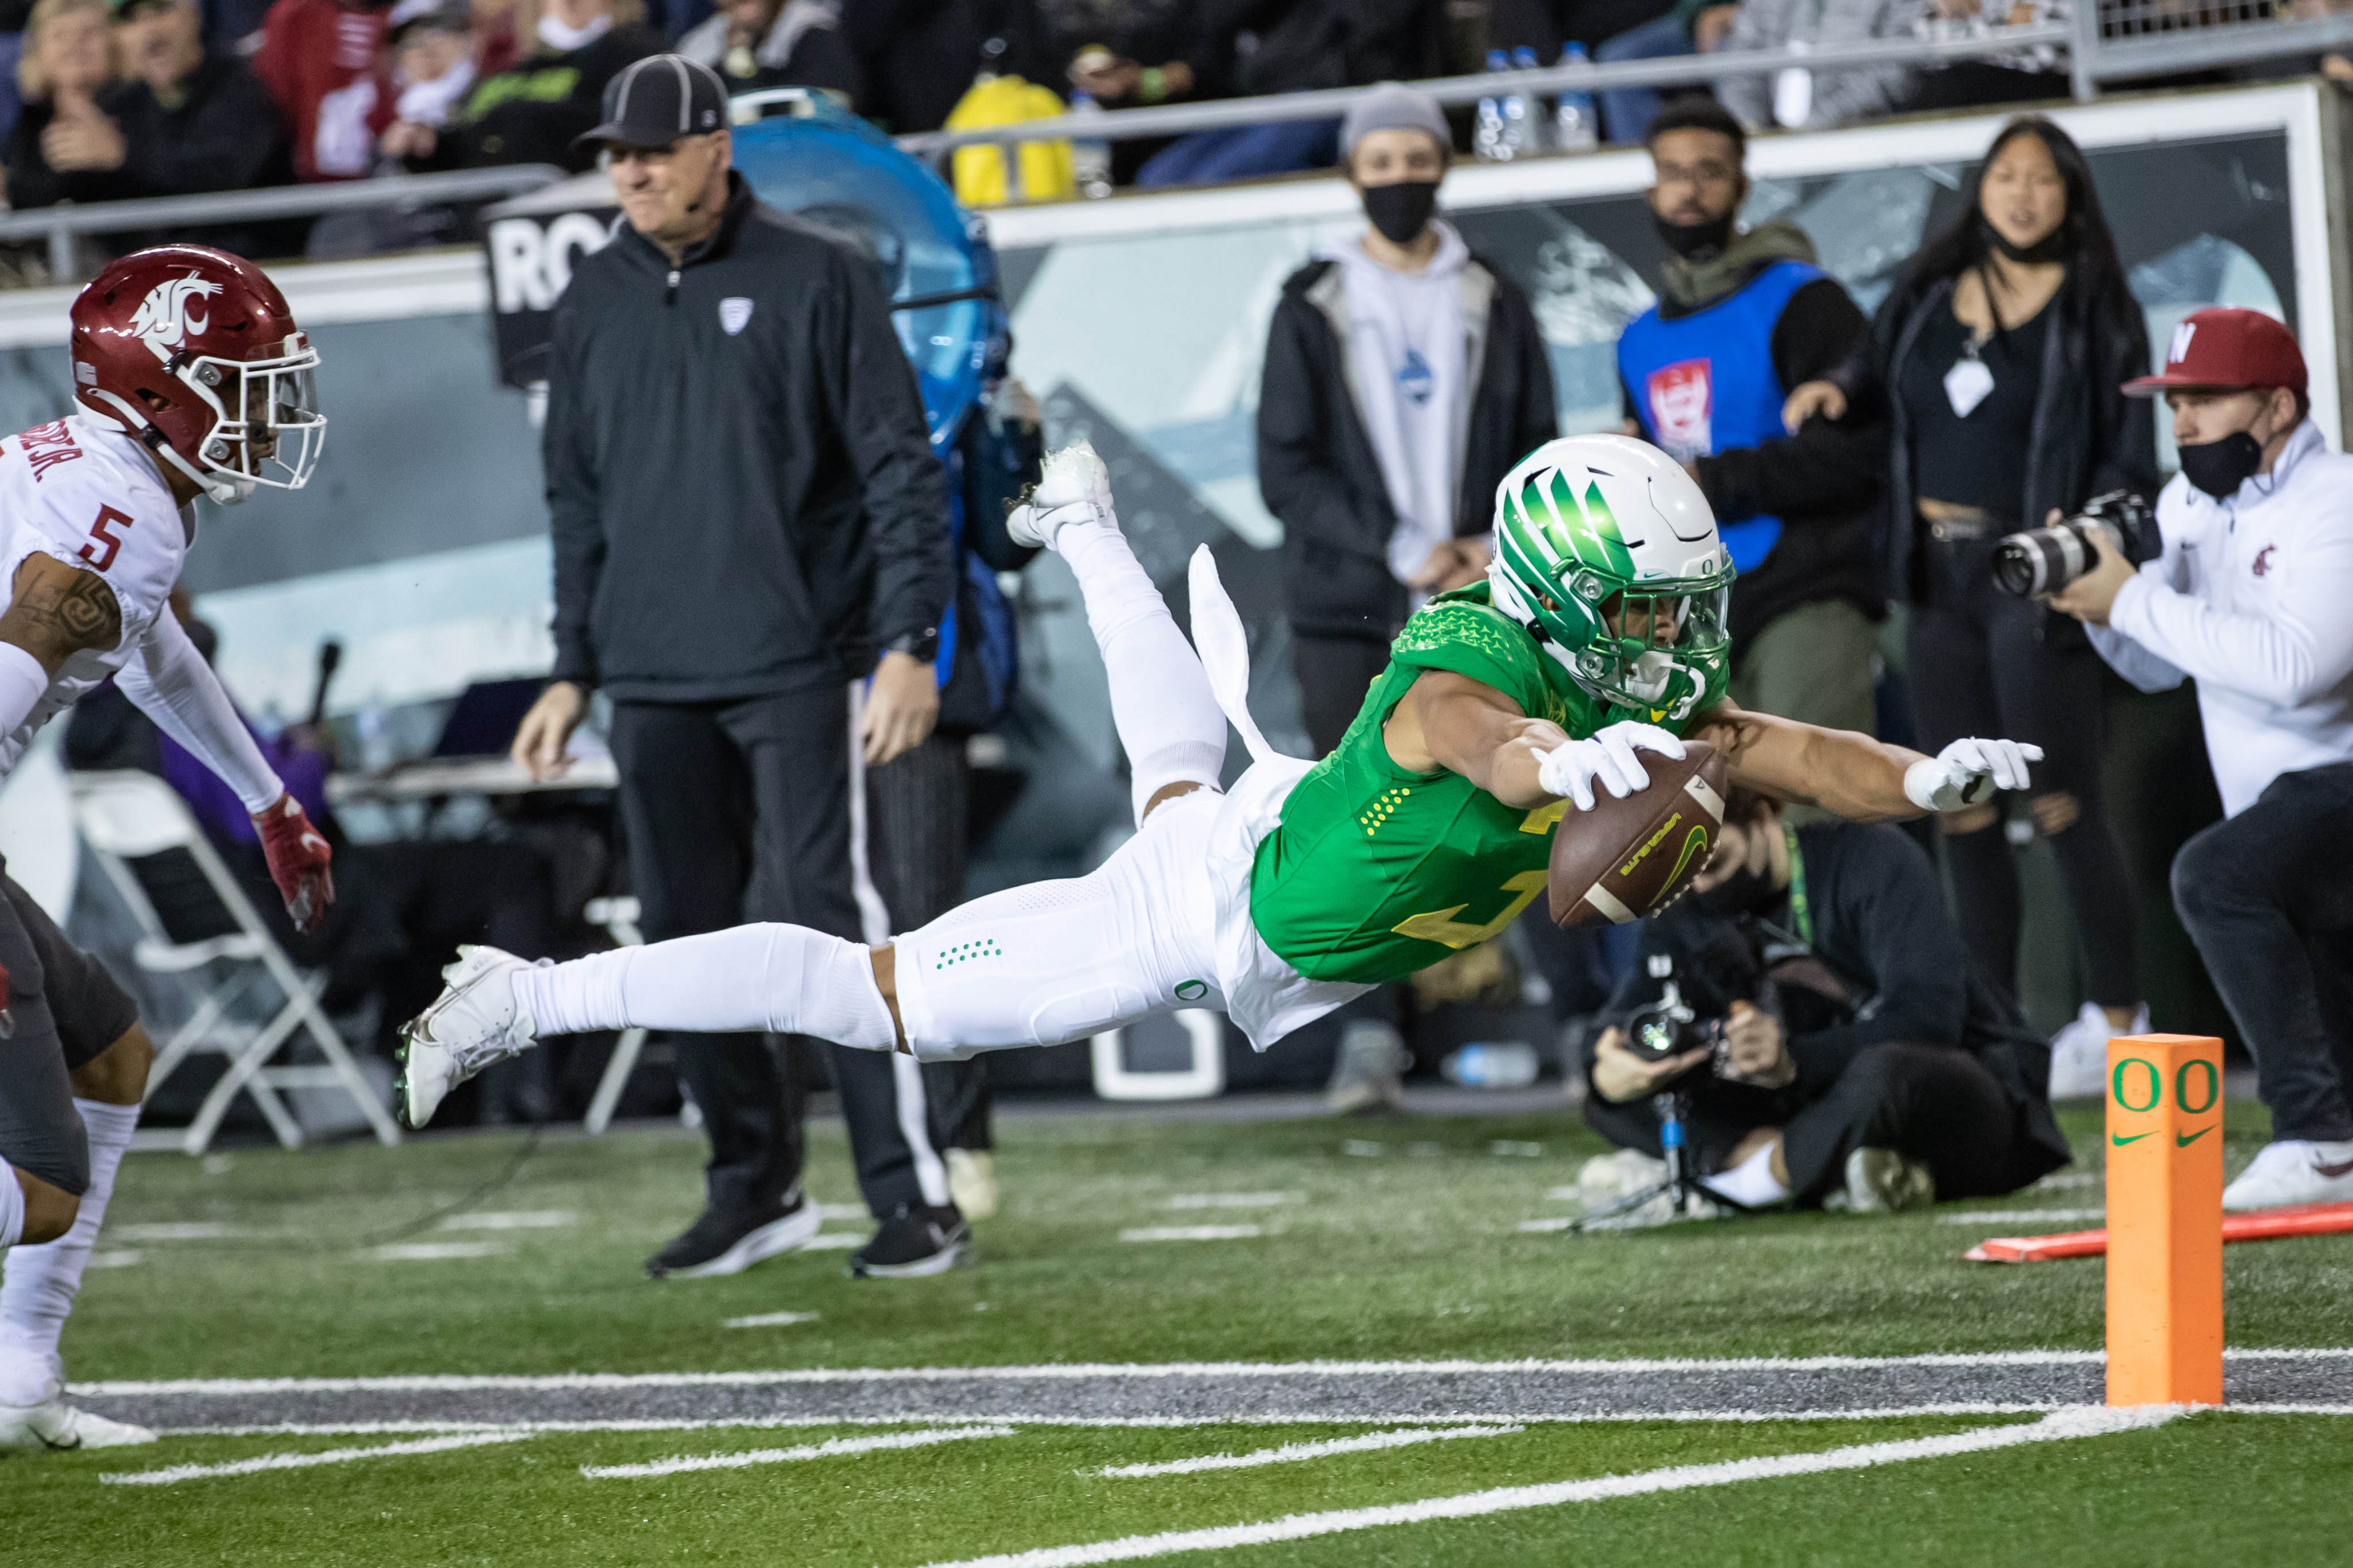 EUGENE, OR - NOVEMBER 13: Oregon wide receiver Johnny Johnson III (3) lunges for the pylon during the first half of a PAC 12 conference matchup between the Oregon Ducks and the Washington State Cougars on November 13, 2021, at Autzen Stadium in Eugene, OR.